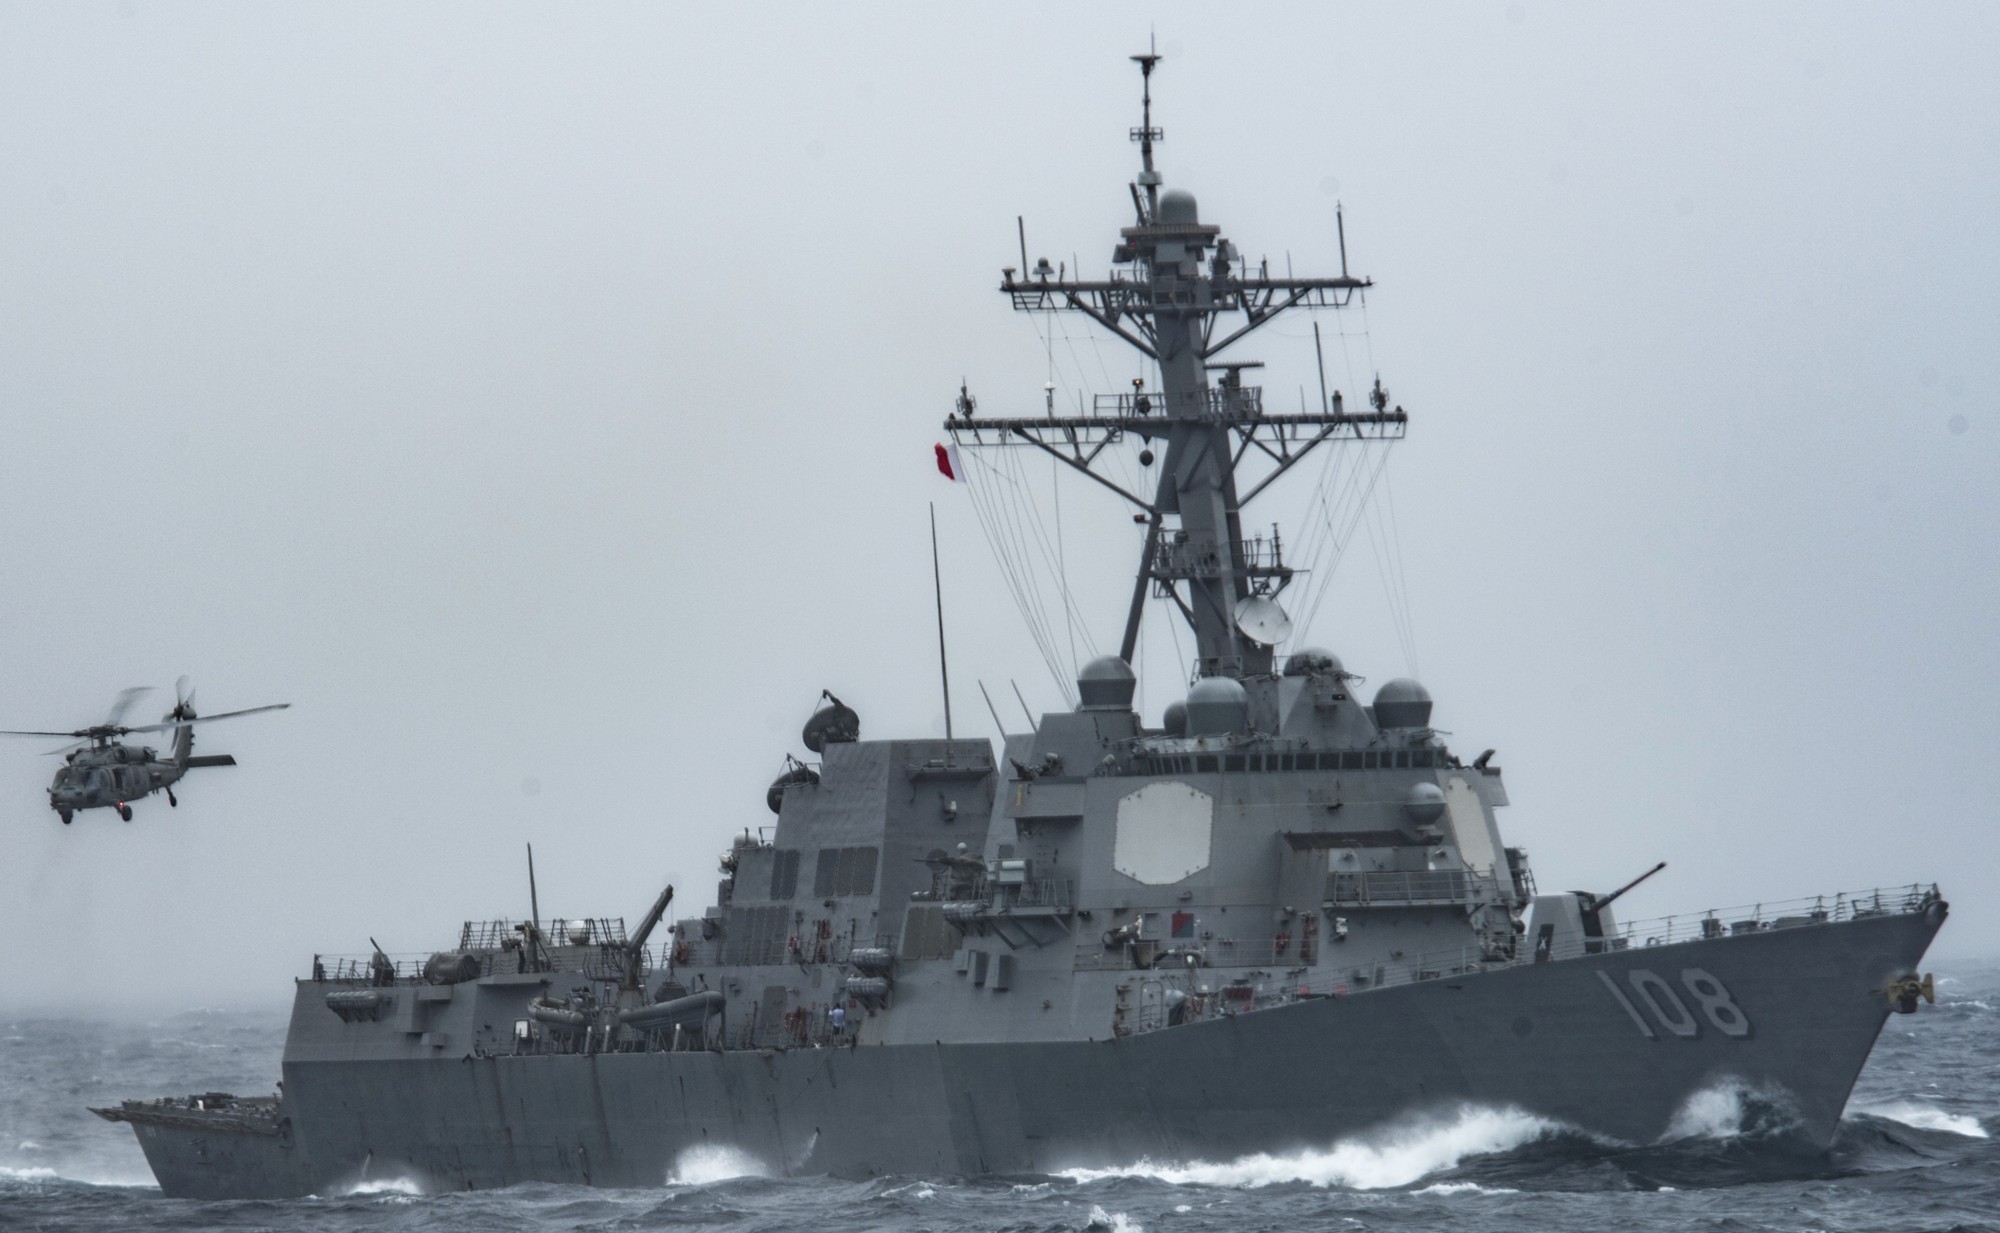 ddg-108 uss wayne e. meyer arleigh burke class guided missile destroyer aegis us navy south china sea 53